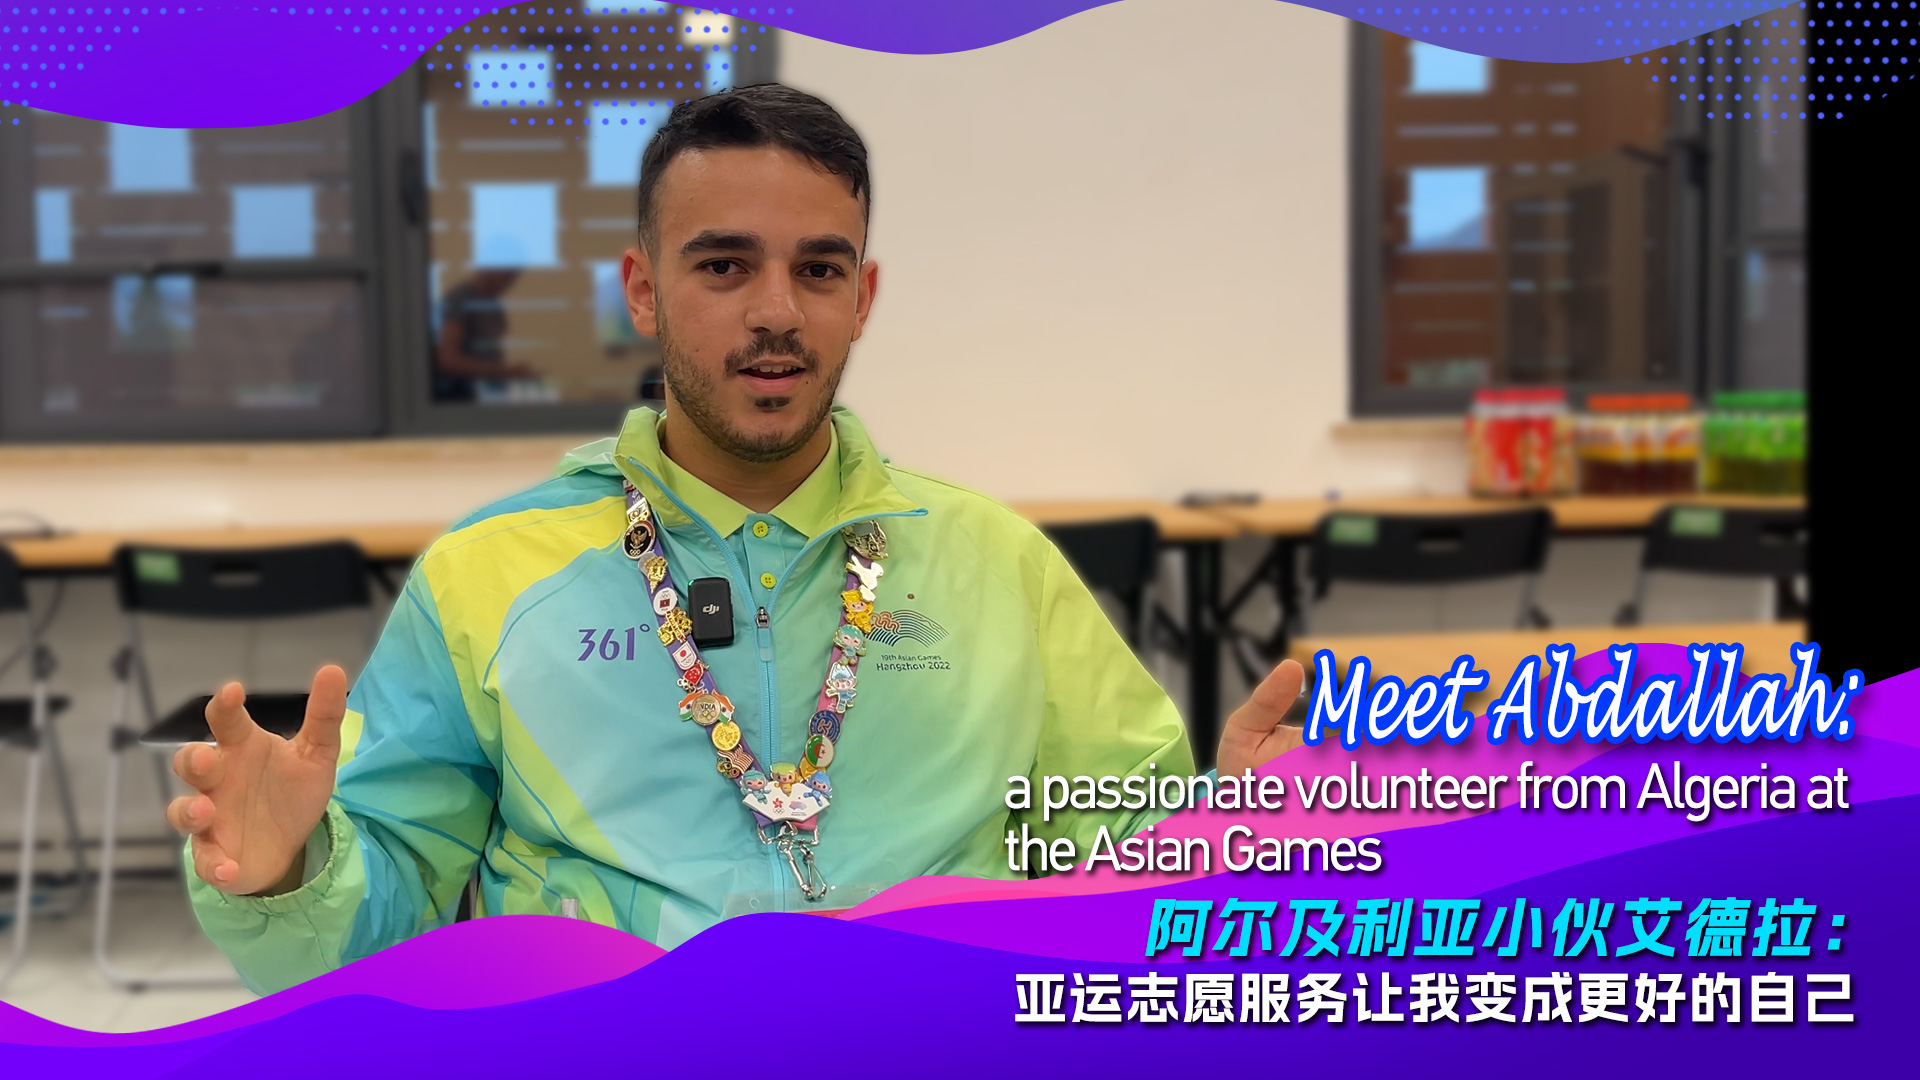 Meet Abdallah: a passionate volunteer from Algeria at the Asian Games